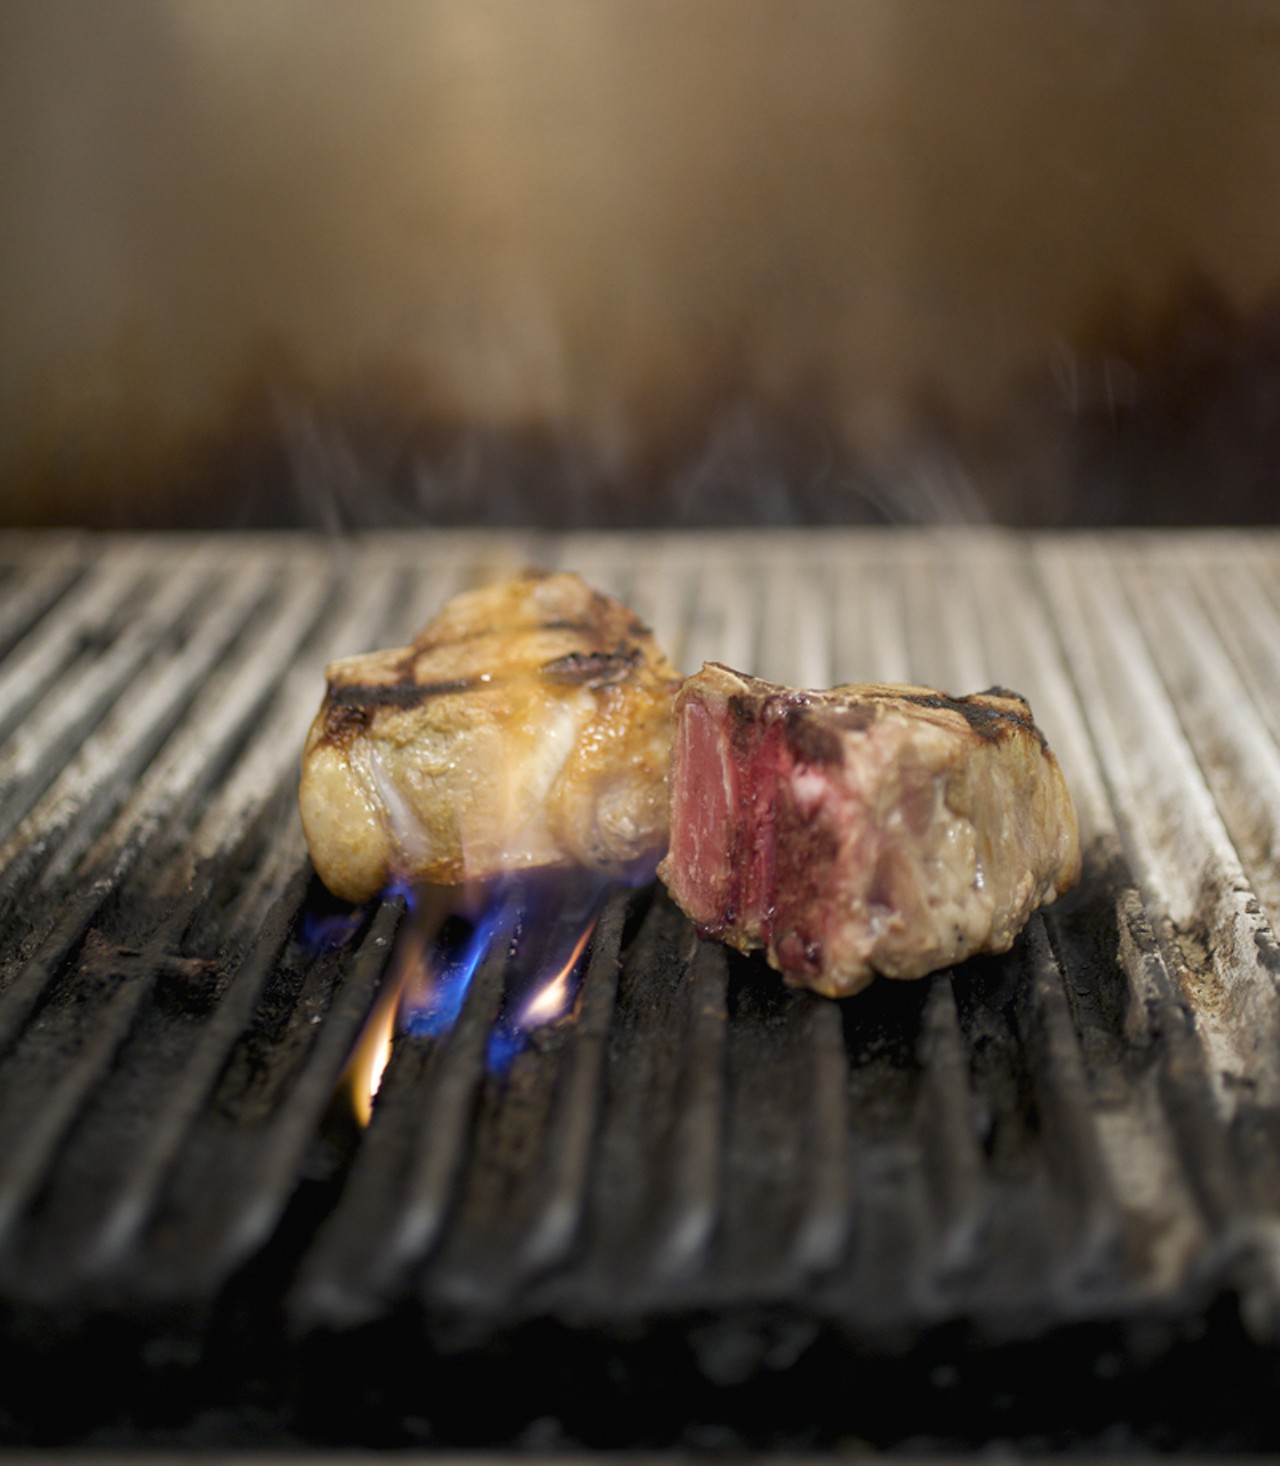 Executive Chef John Buchanan&rsquo;s lamb porterhouse on the grill. He tells me it&rsquo;s a very original cut of meat. He likes taking a classic dish and making it more contemporary.